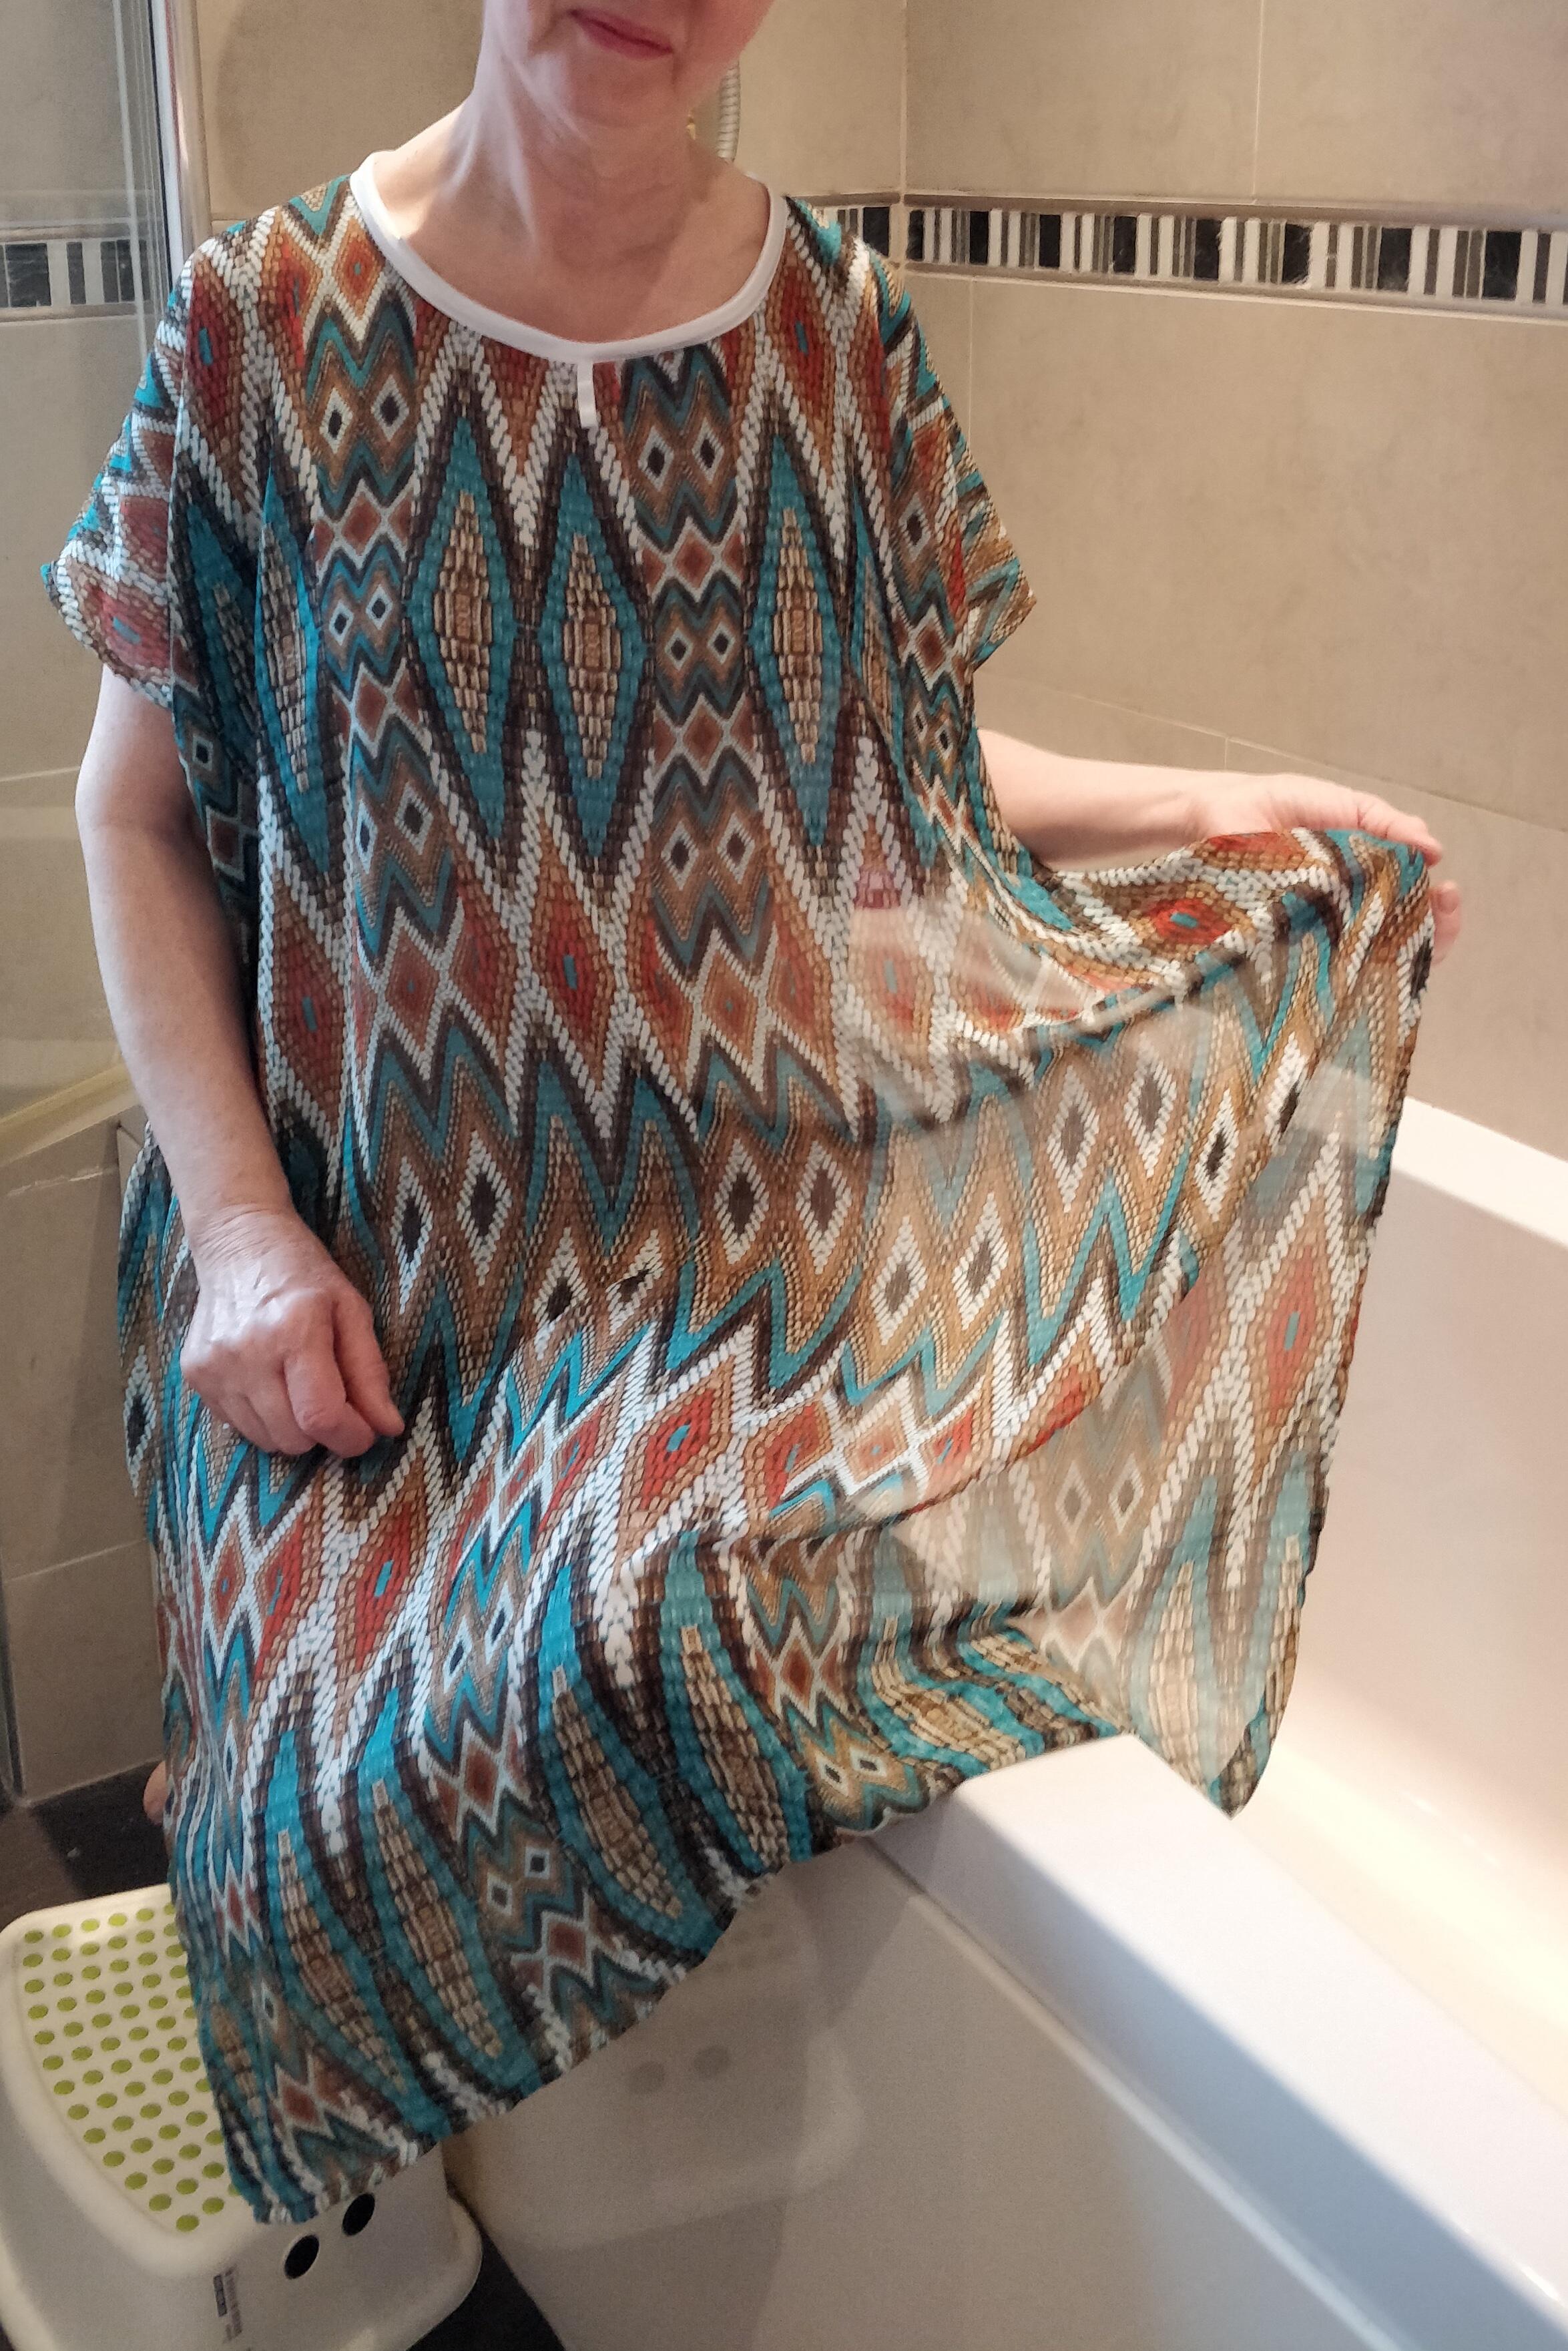 Teal/tan Aztec-type design NeverNaked(tm) Shower Drapron® - dementia dignity showering cape drapes over shoulders to be left on whilst showering so dignity is maintained. No sleeves. Small magnetic fastening at back